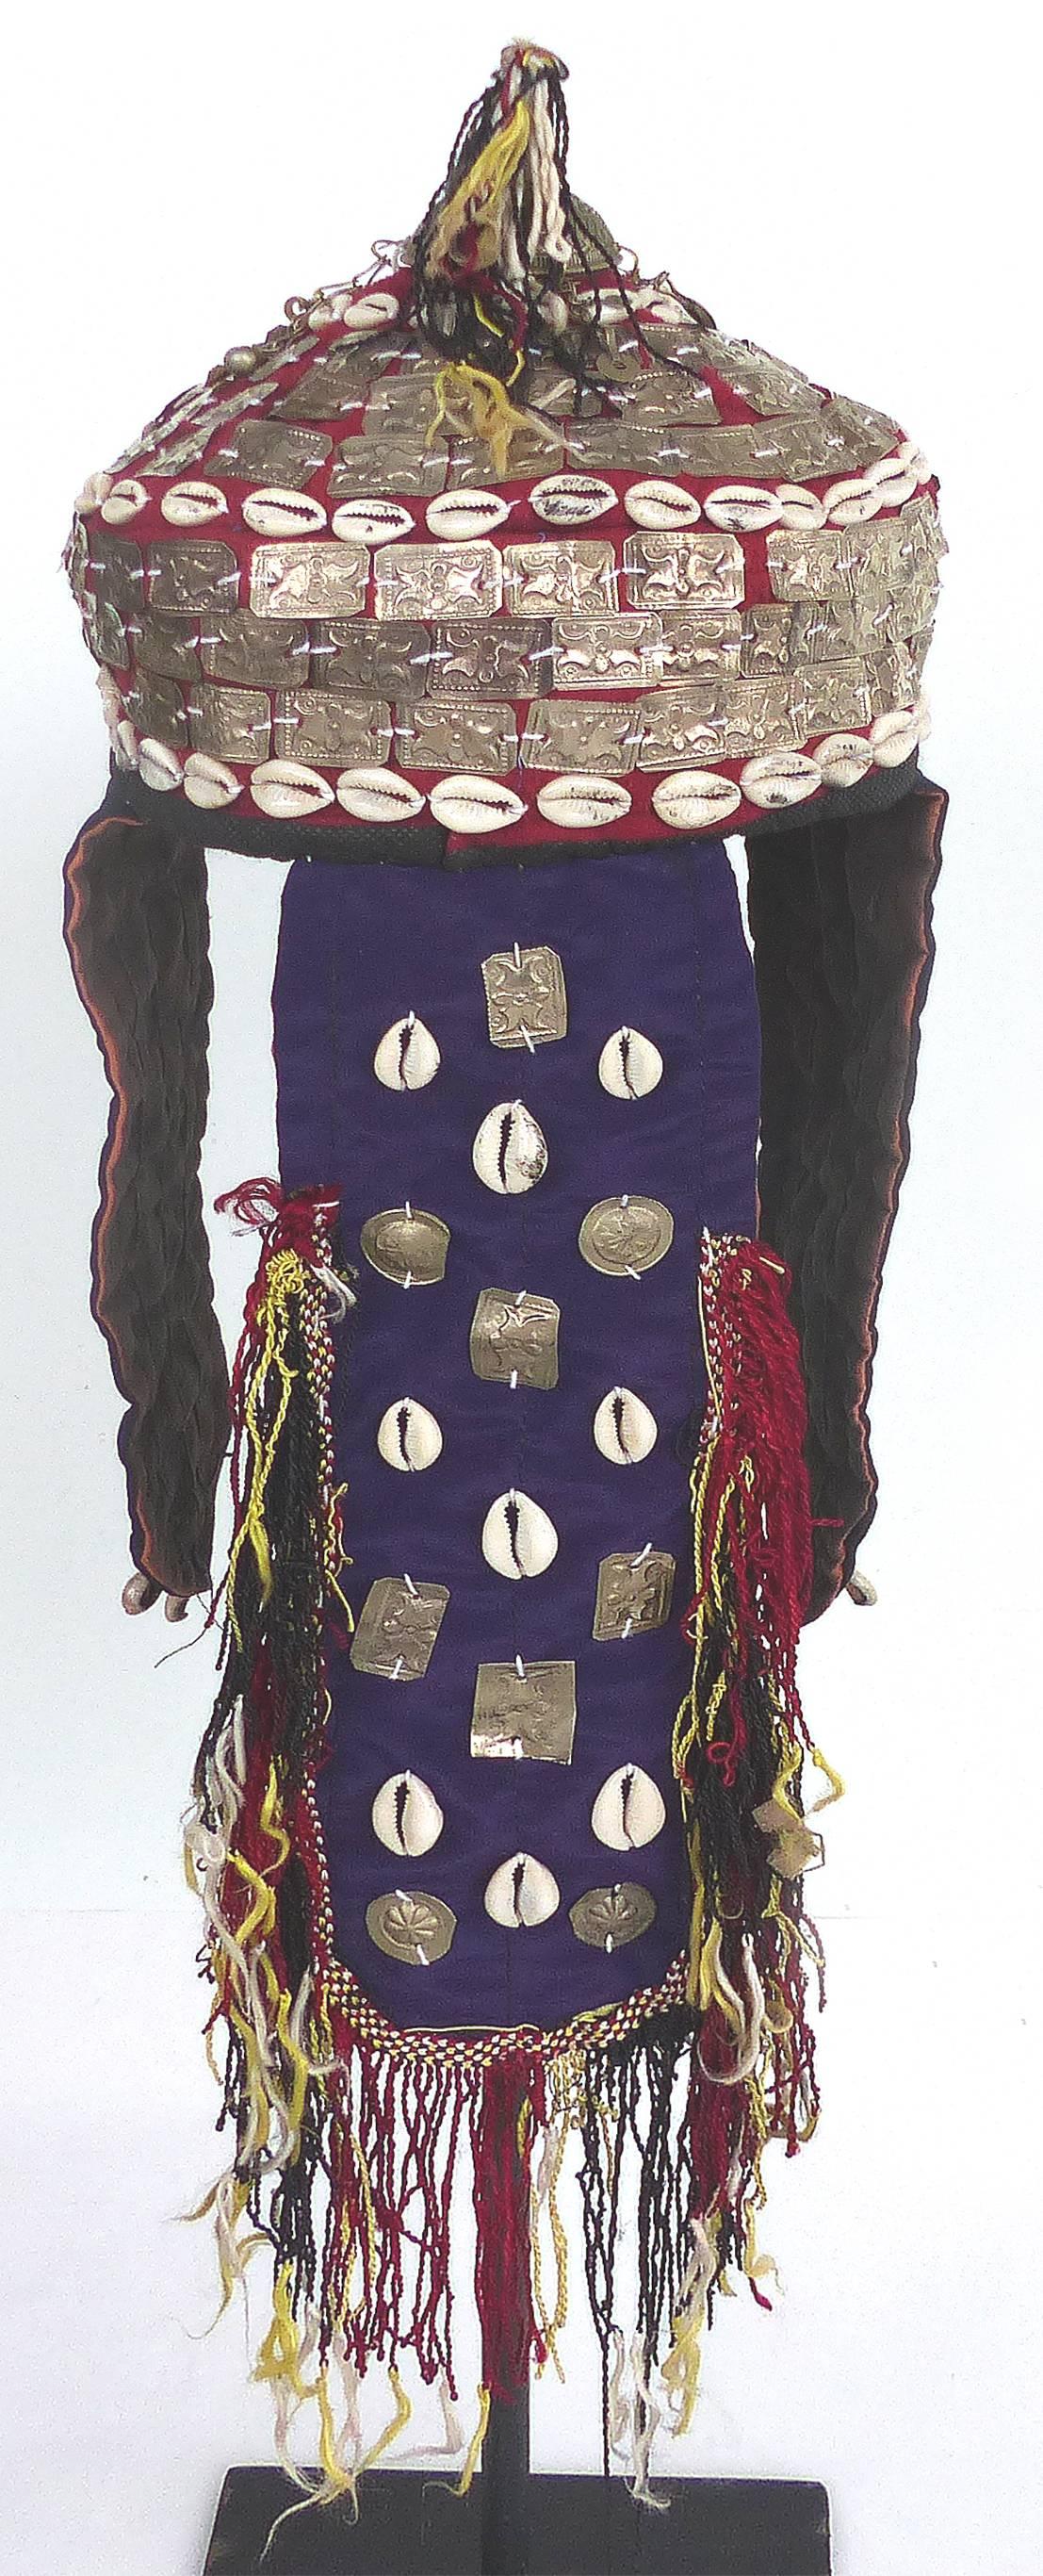 Offered for sale is a 20th century Turkmenistan wedding headdress presented on a contemporary metal stand. The headdress is handmade with fabric, shells and embossed and engraved metal in the ancient style of the Turkmenistan people.  Height when